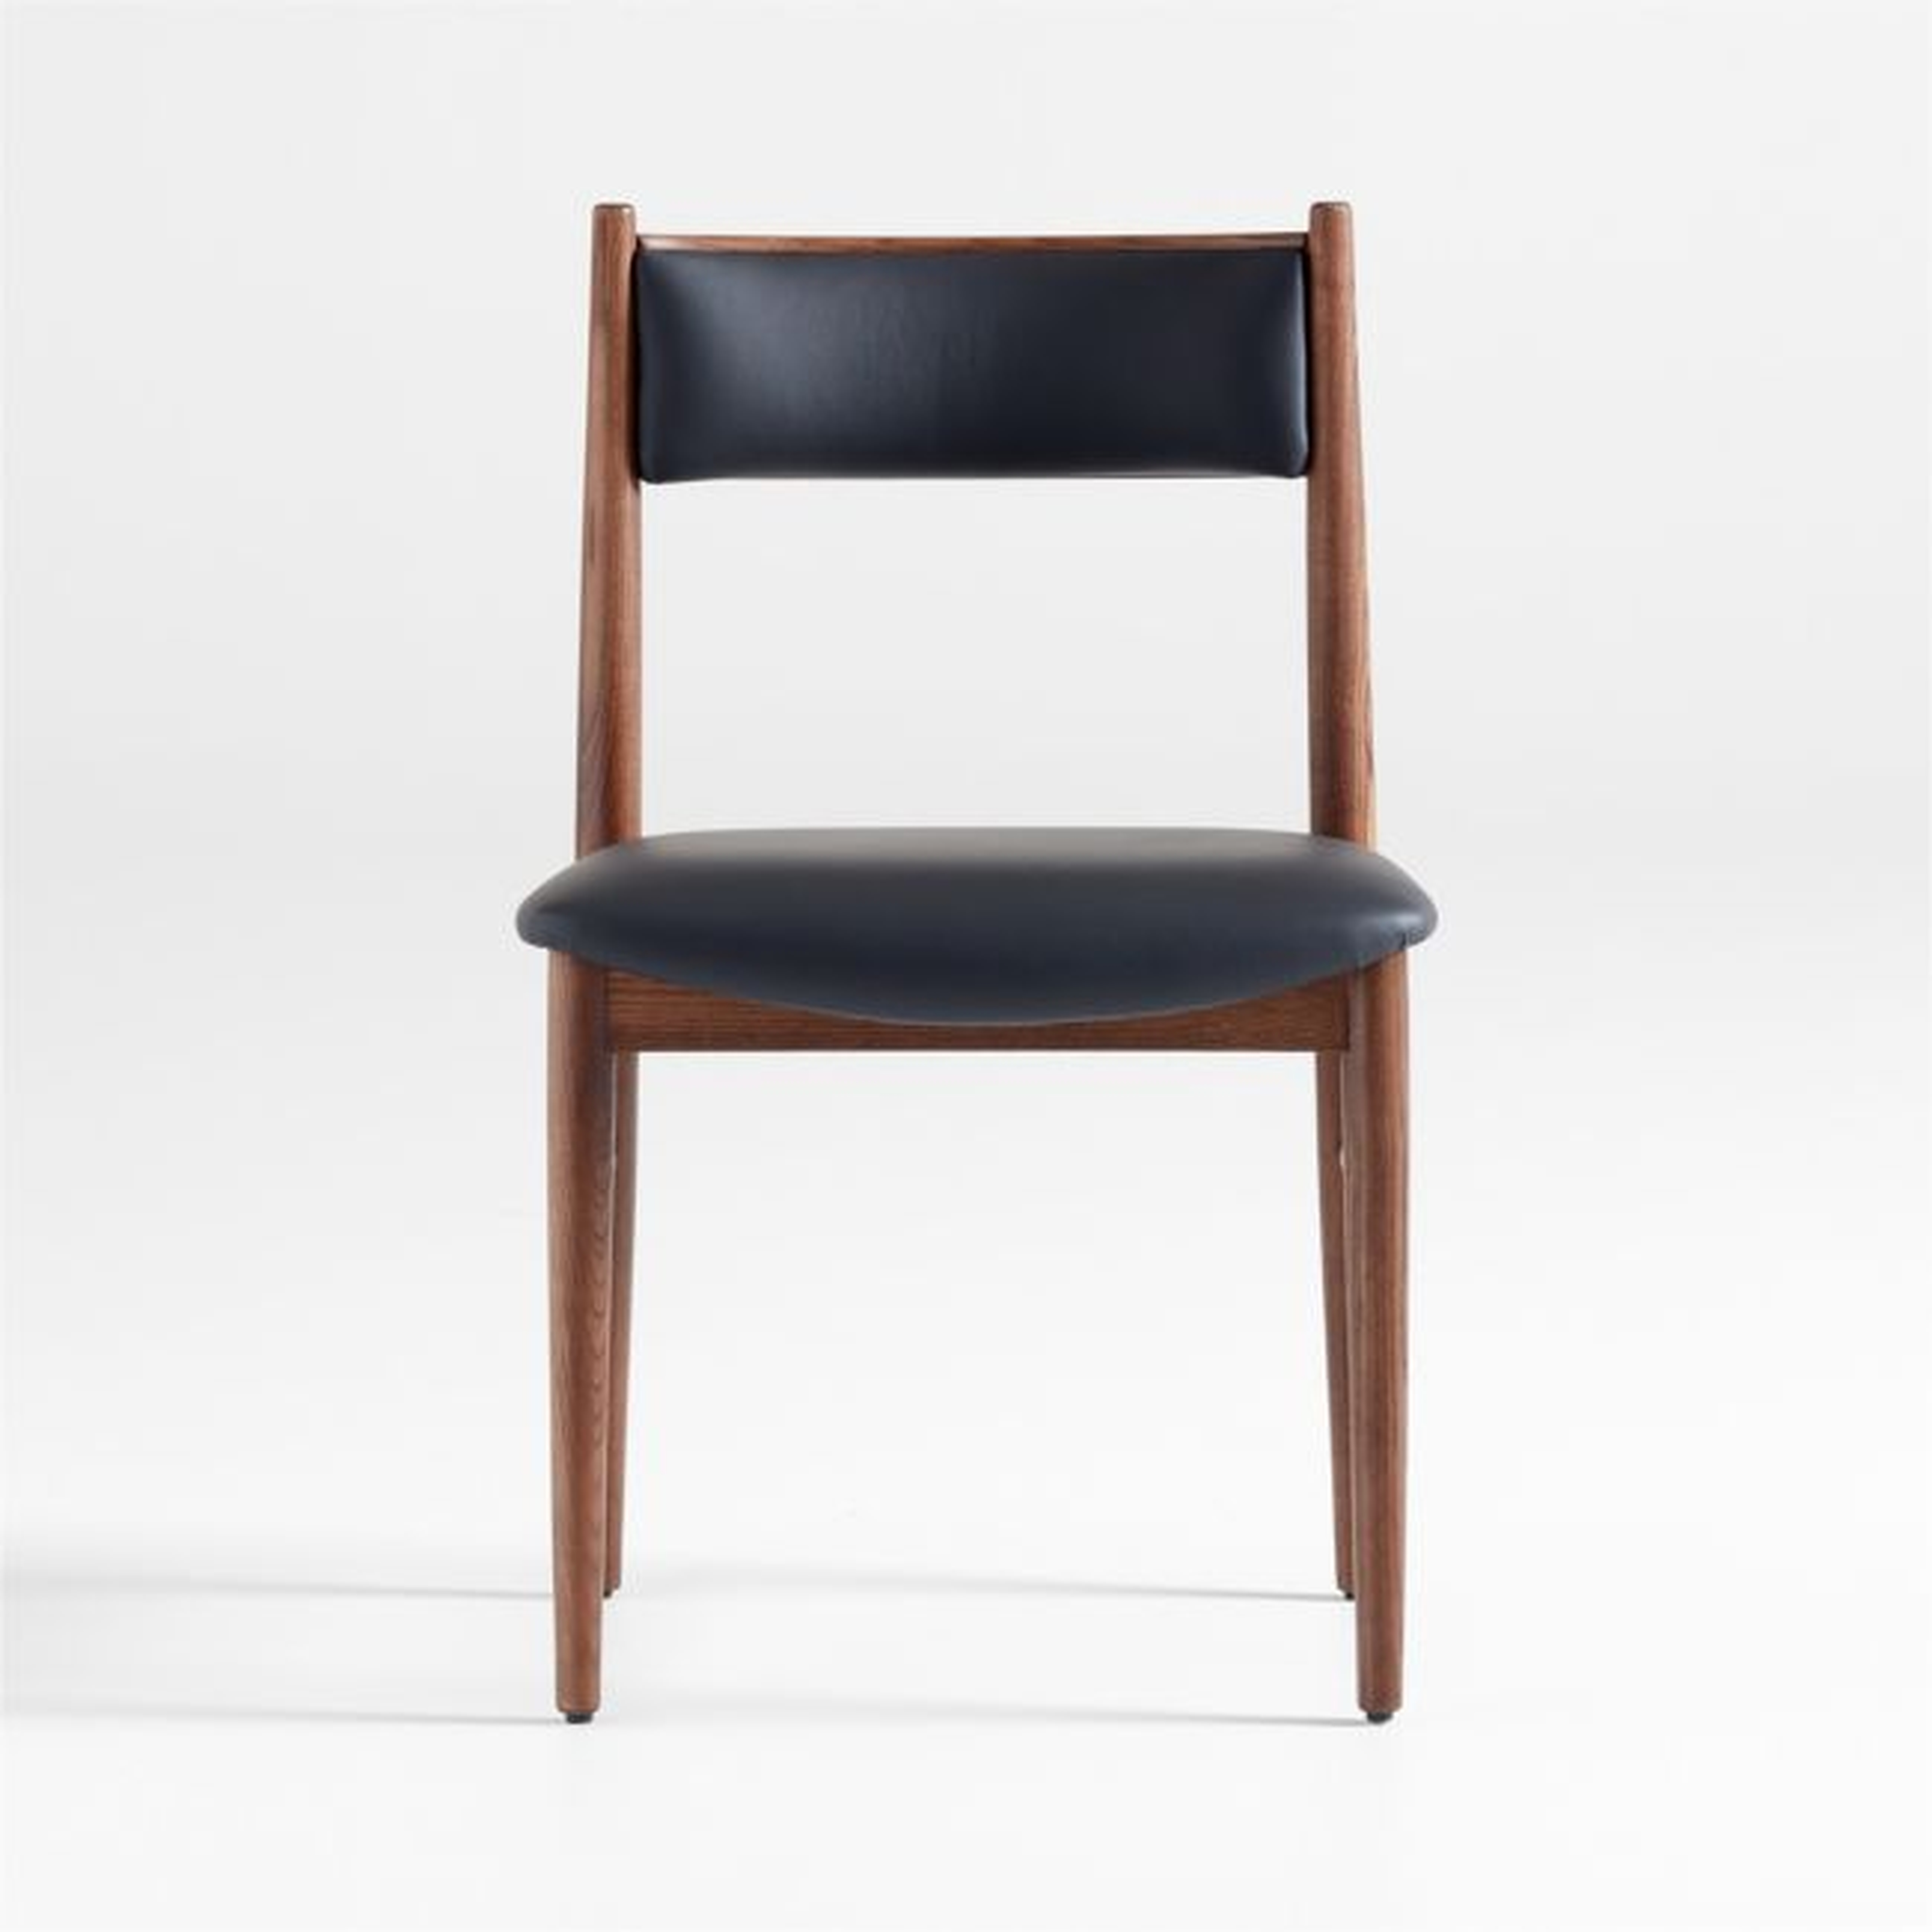 Petrie Barley Ash Black Leather Dining Chair - Crate and Barrel